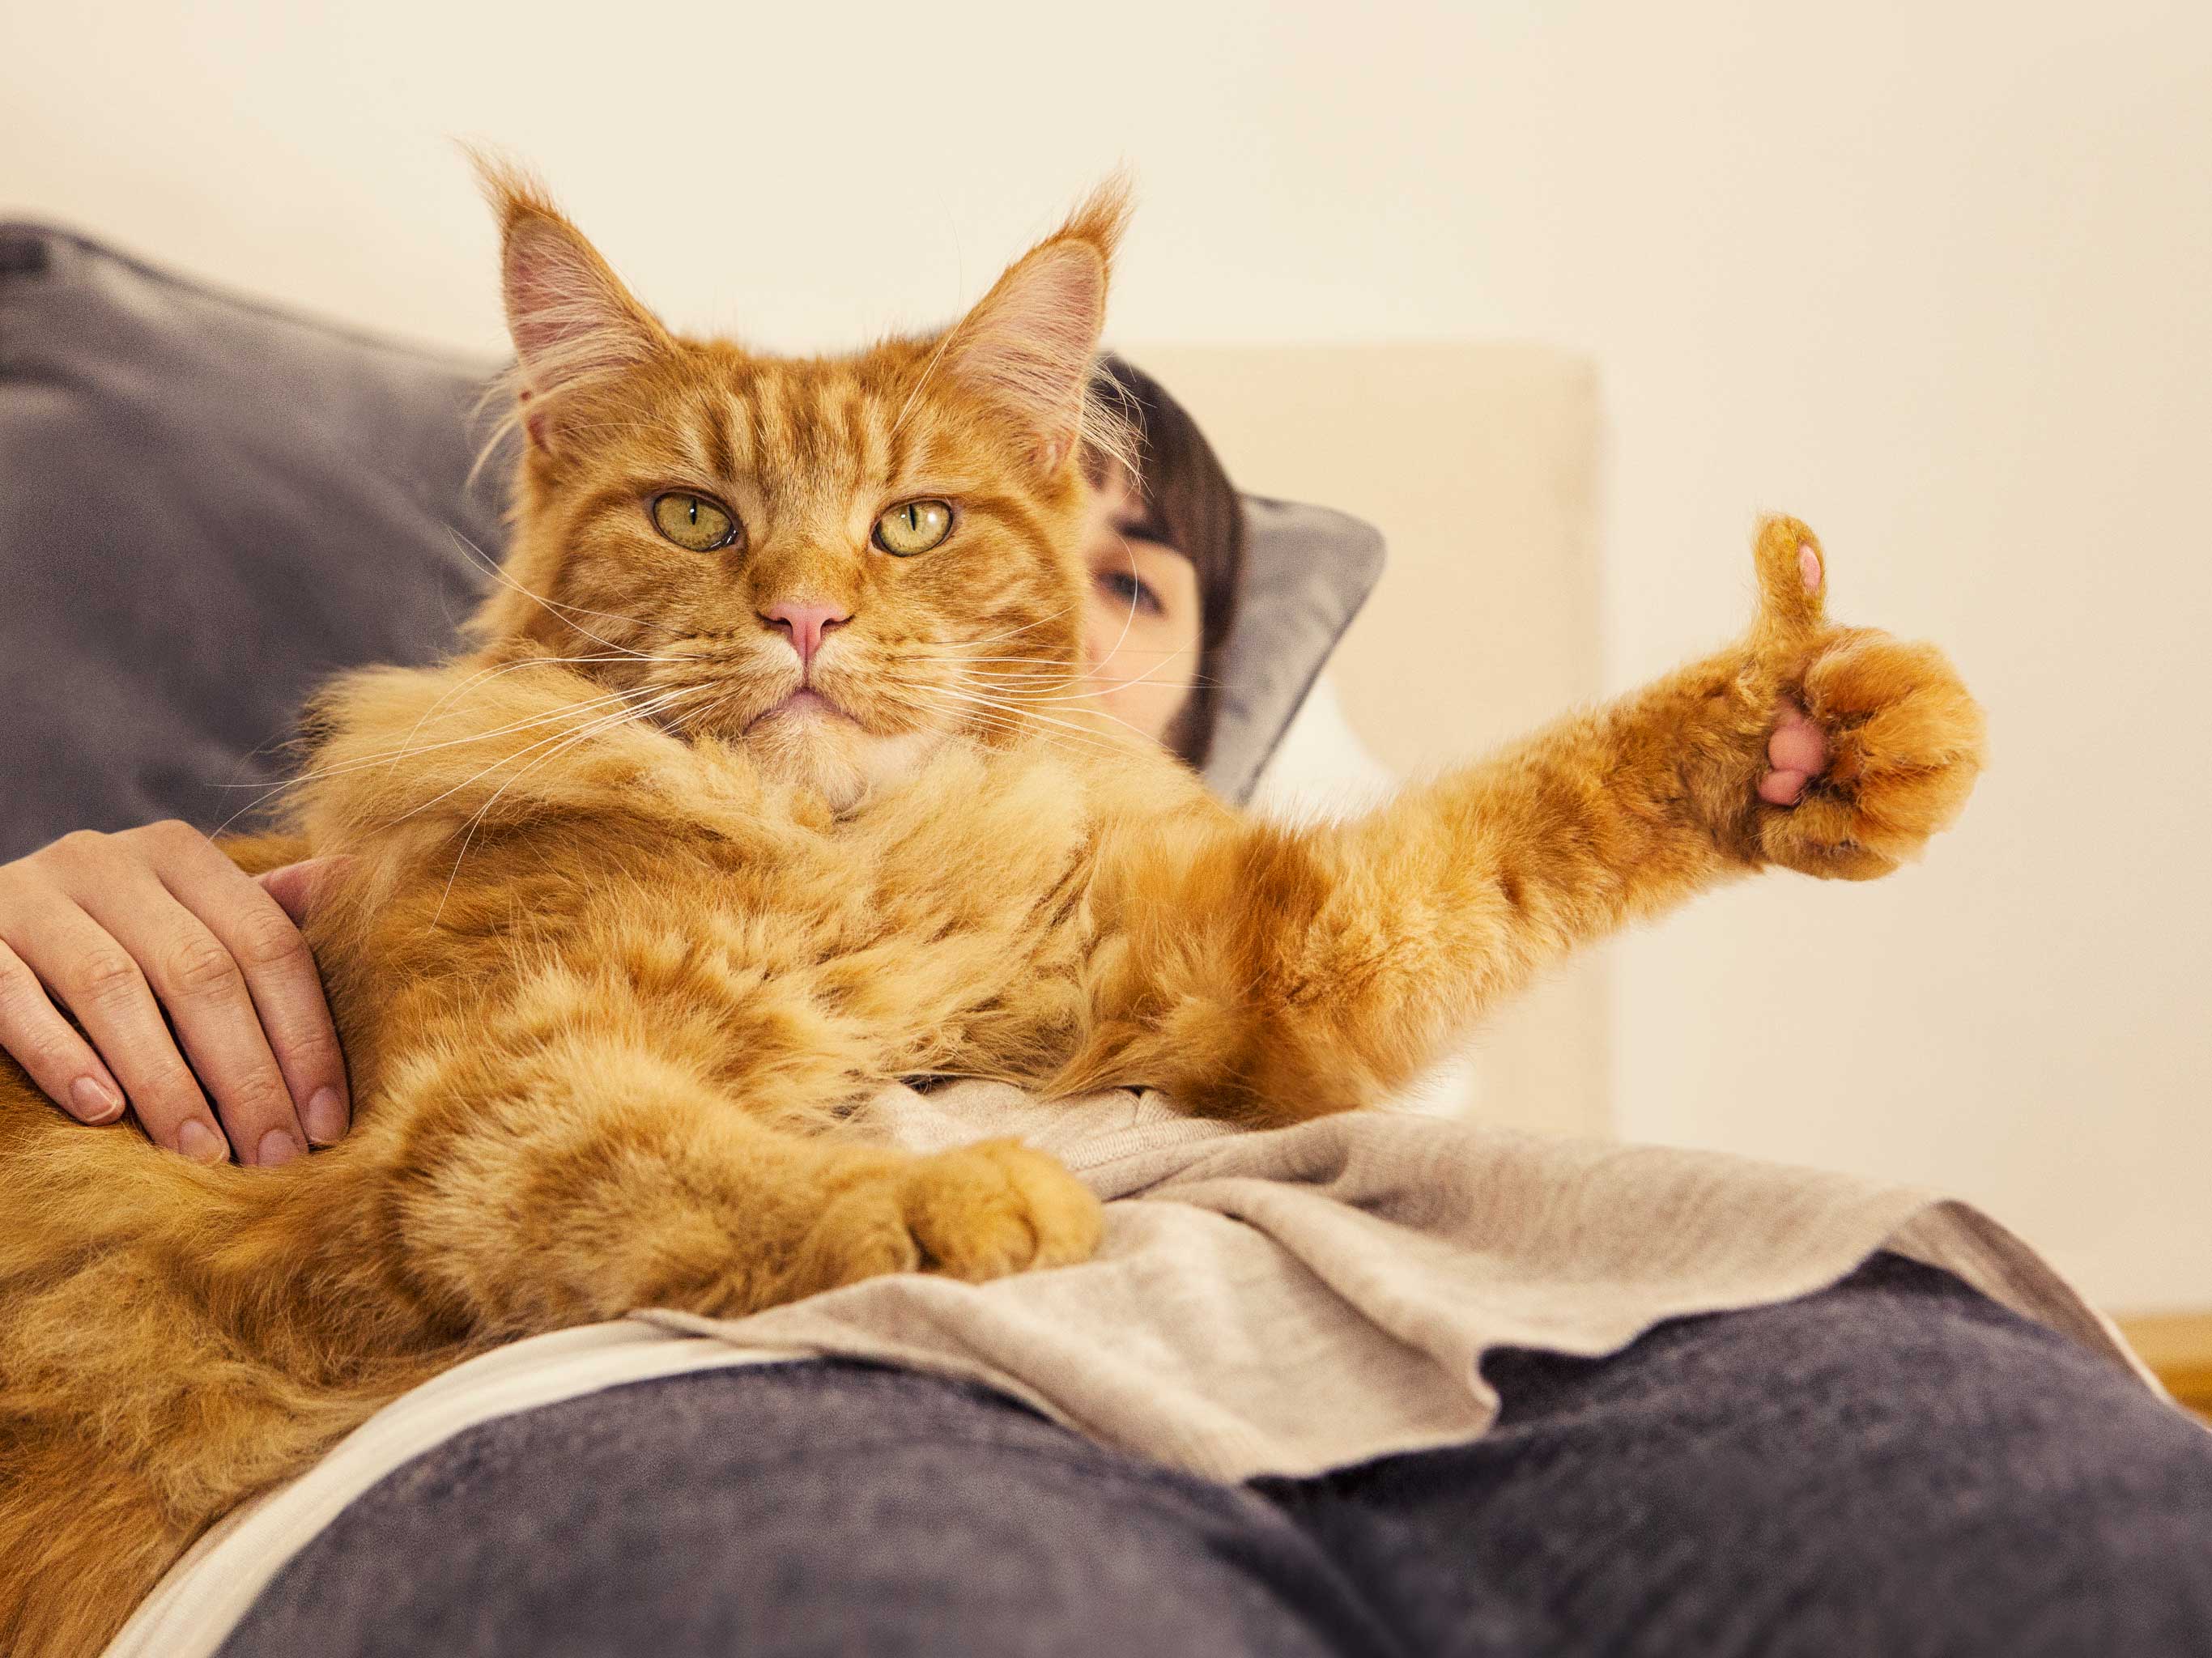 Alex Howe animals ginger cat thumbs up upside down relaxing on sofa retouch...